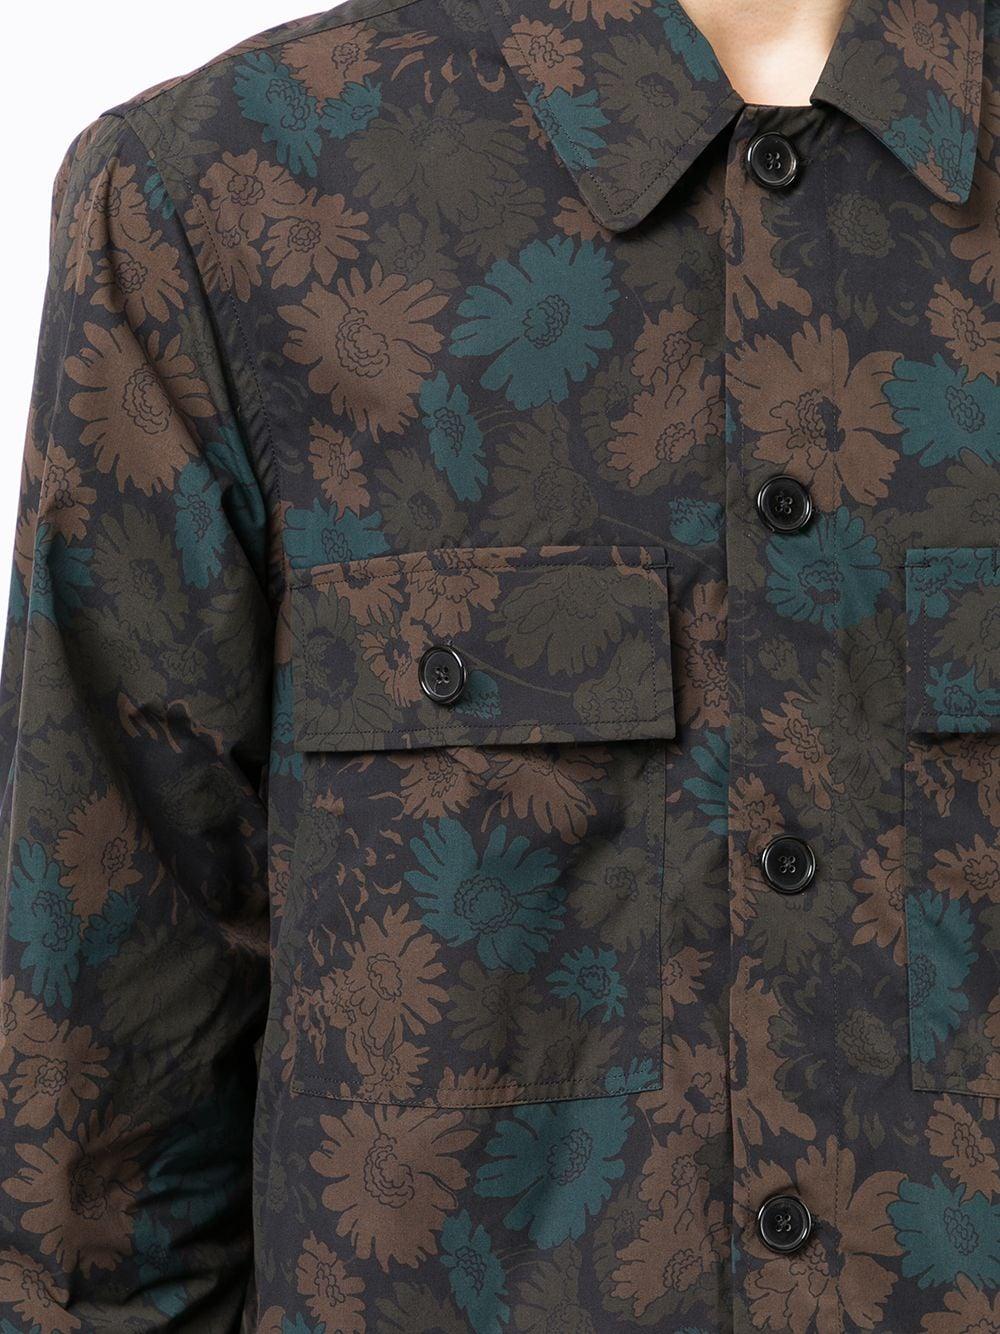 Paul Smith Archive Floral Print Shirt in Brown for Men | Lyst